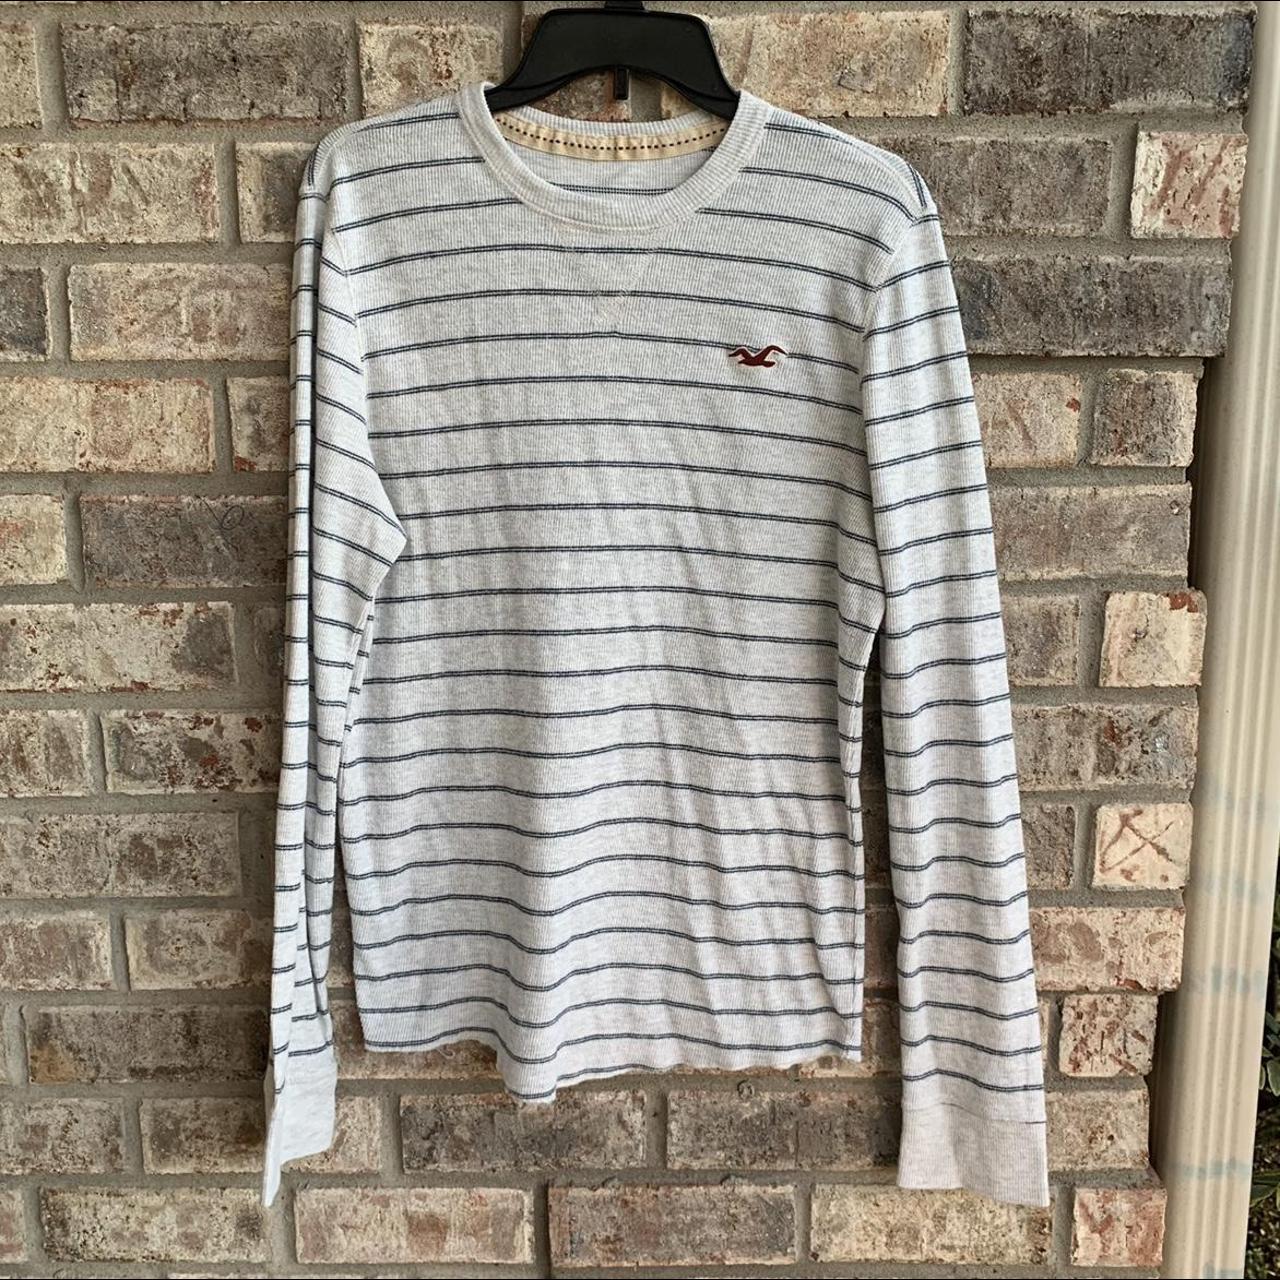 hollister top size large i have tons of other items - Depop